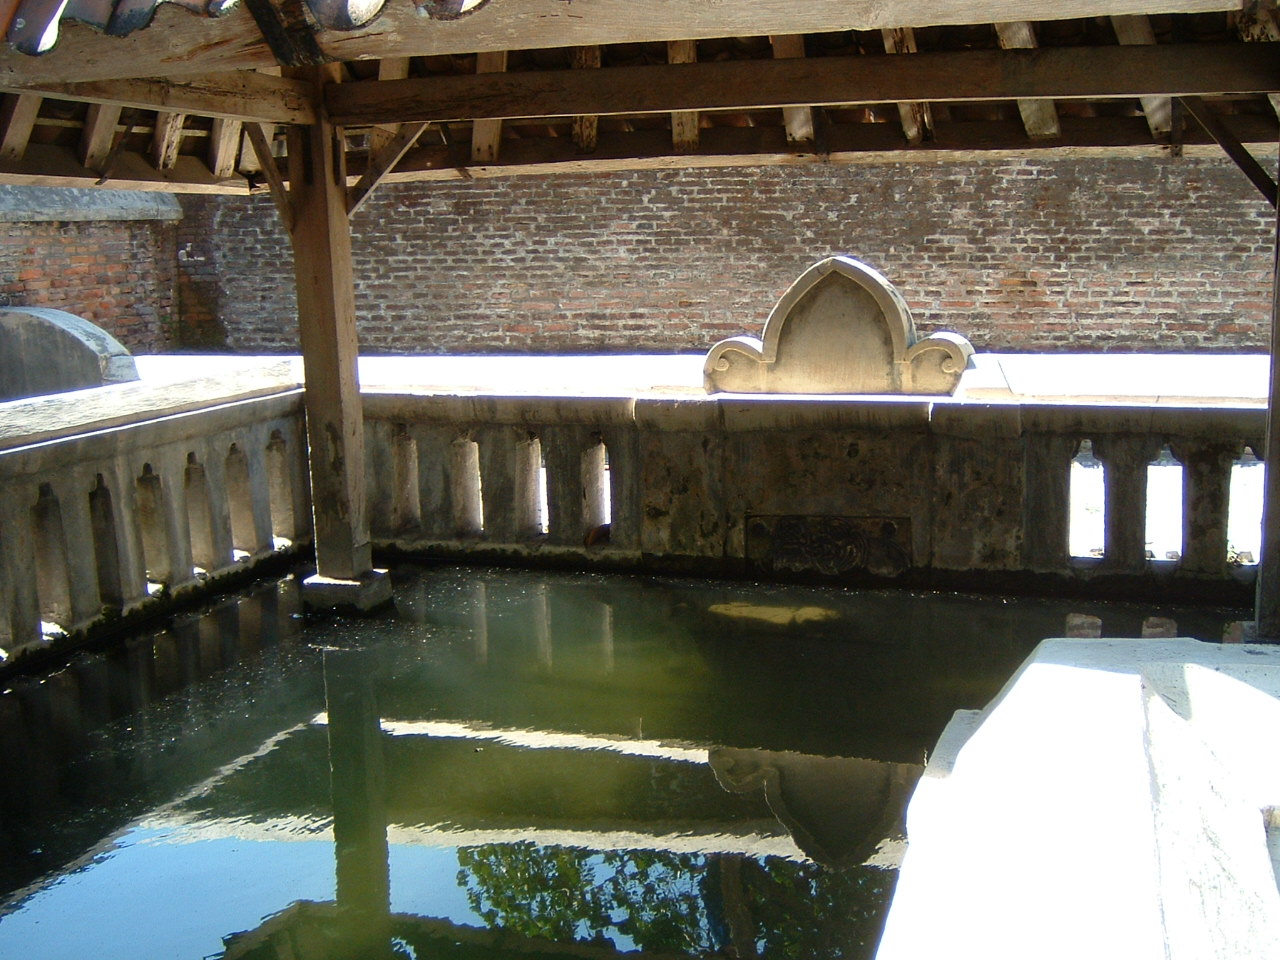 View looking north from covered pool in women's bathing area